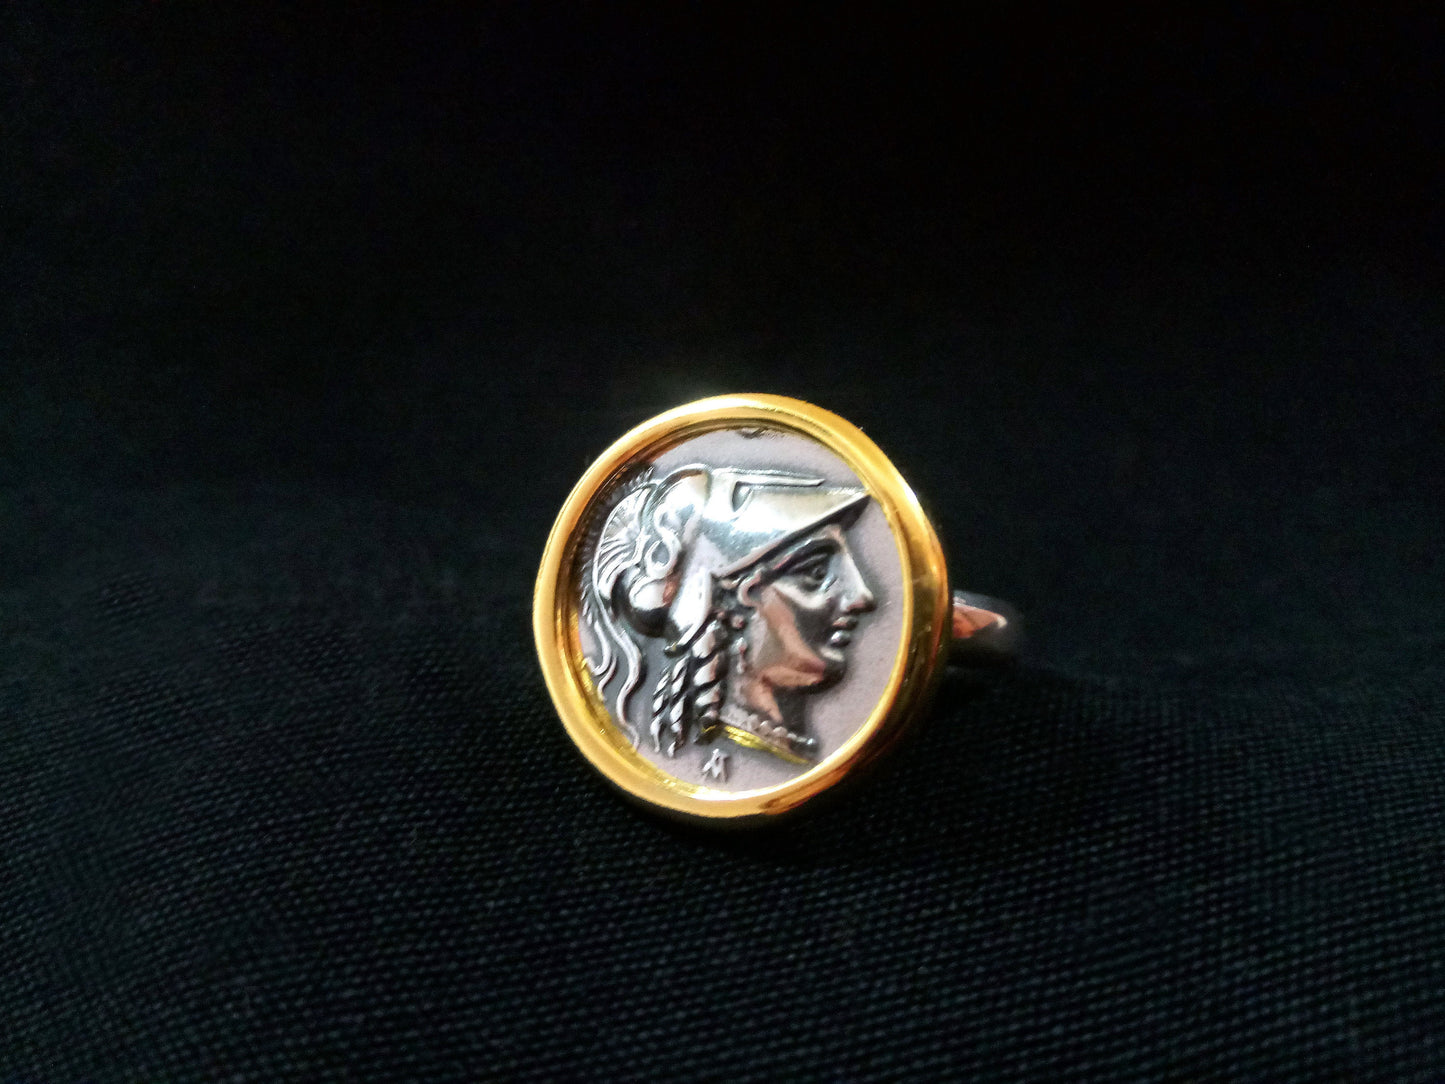 Gold-plated ring featuring the intricate Ancient Greek Goddess Athena motif, symbolizing wisdom and strength. Width of 21 mm. Marked with 925 stamp. Crafted in Greece. Free shipping.